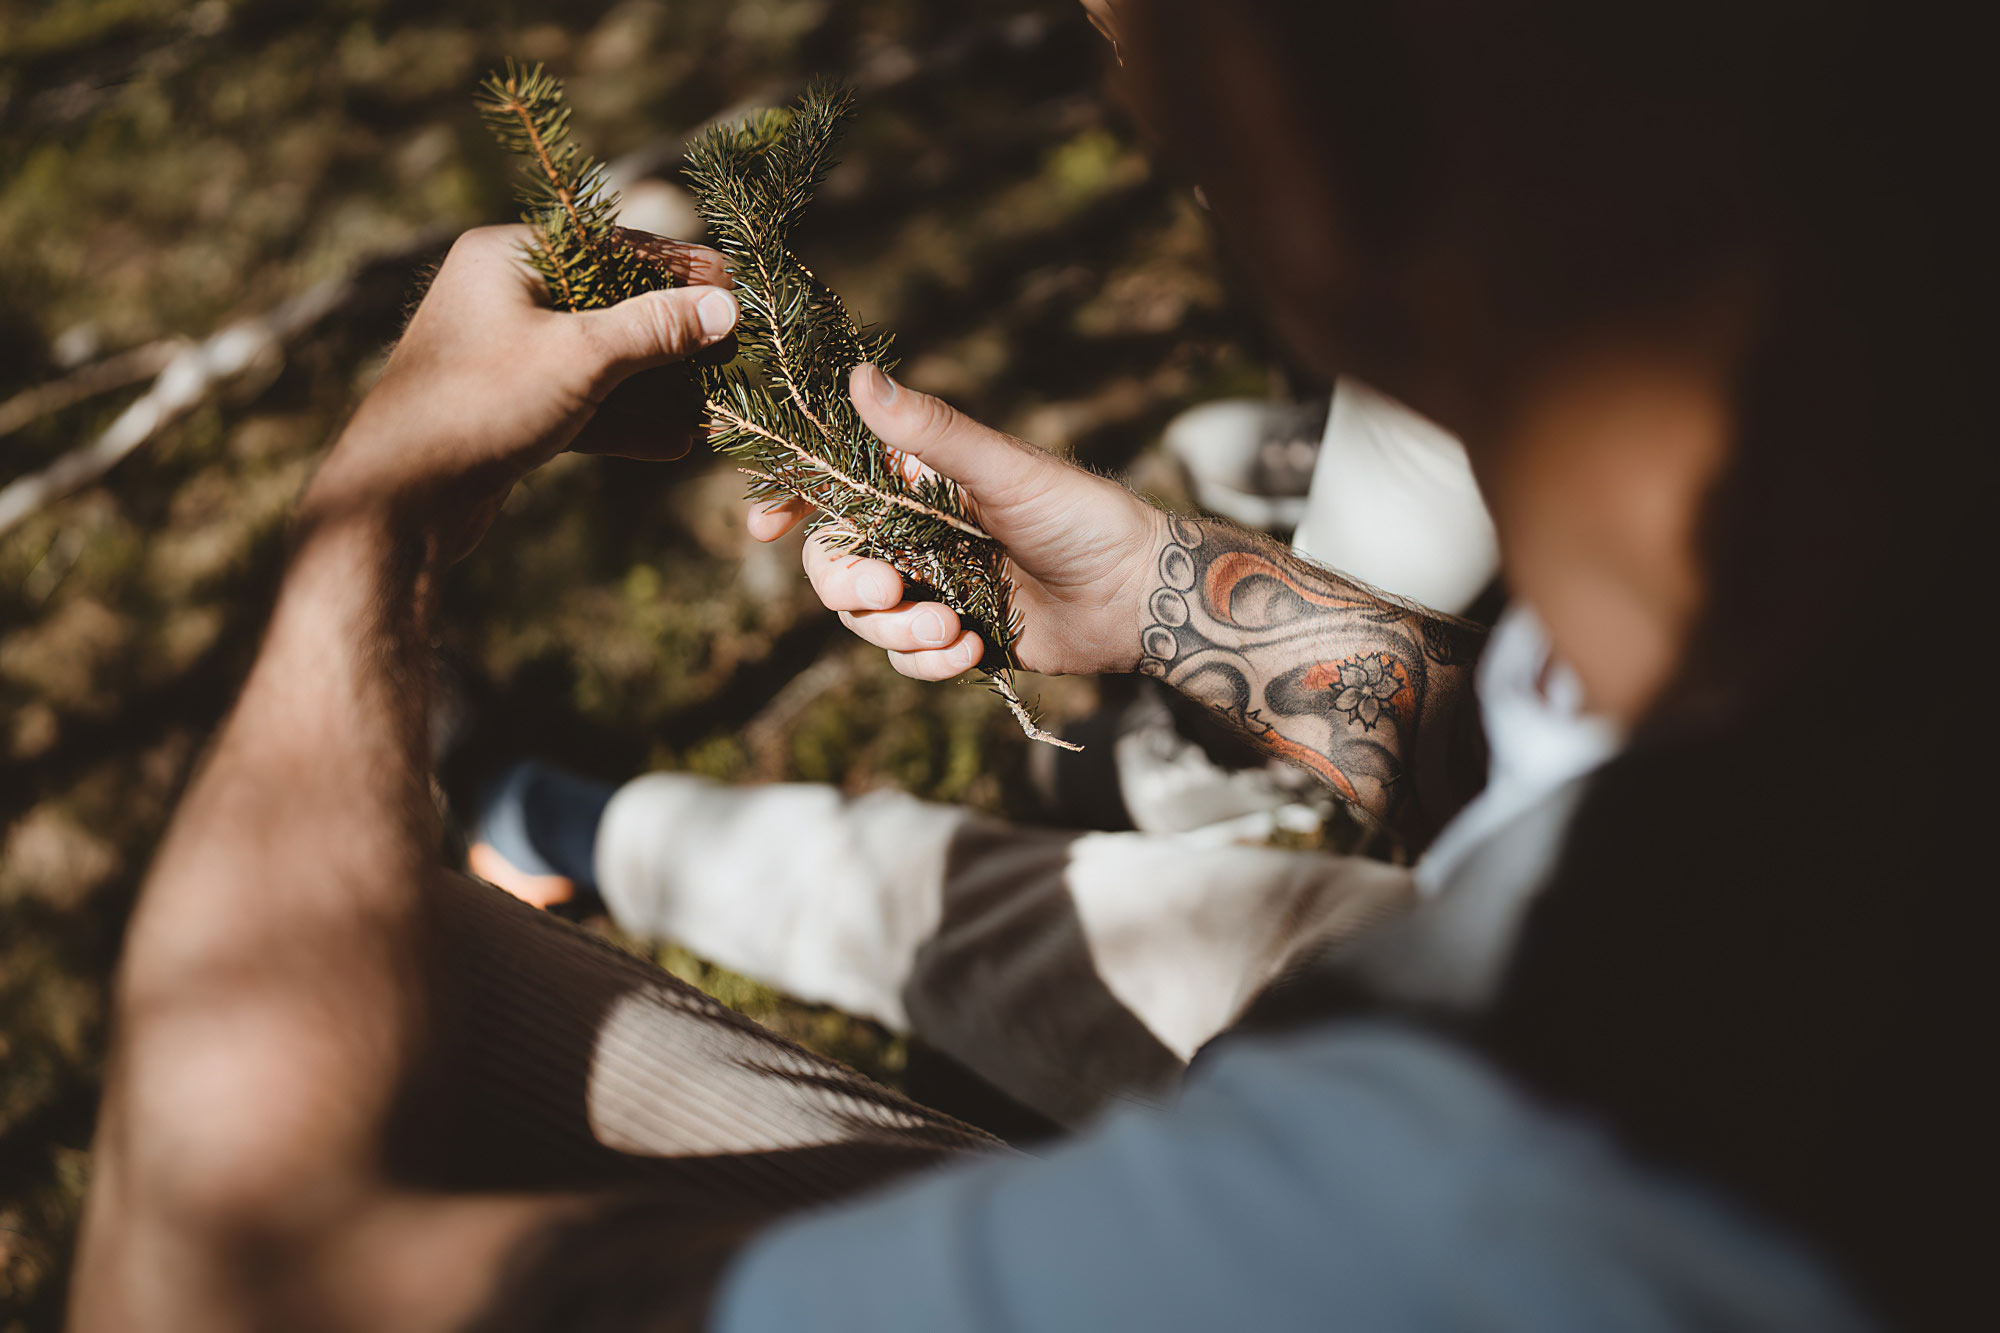 A close-up of man with tattooed arms holding spruce branches